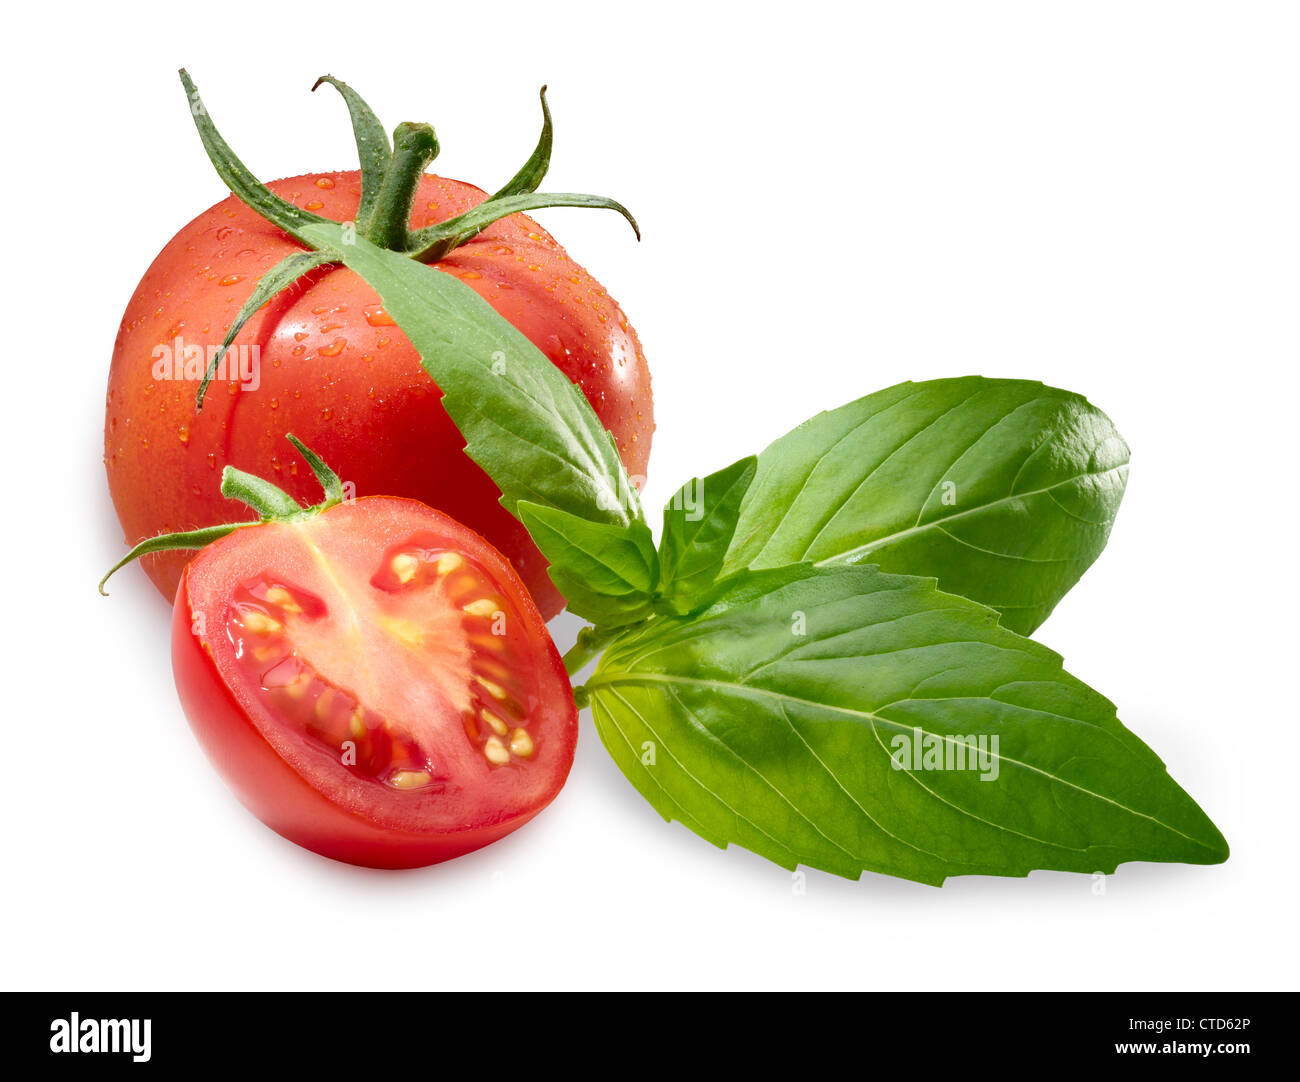 Whole tomato with an half tomato in front and three leafs of basil against white. Stock Photo